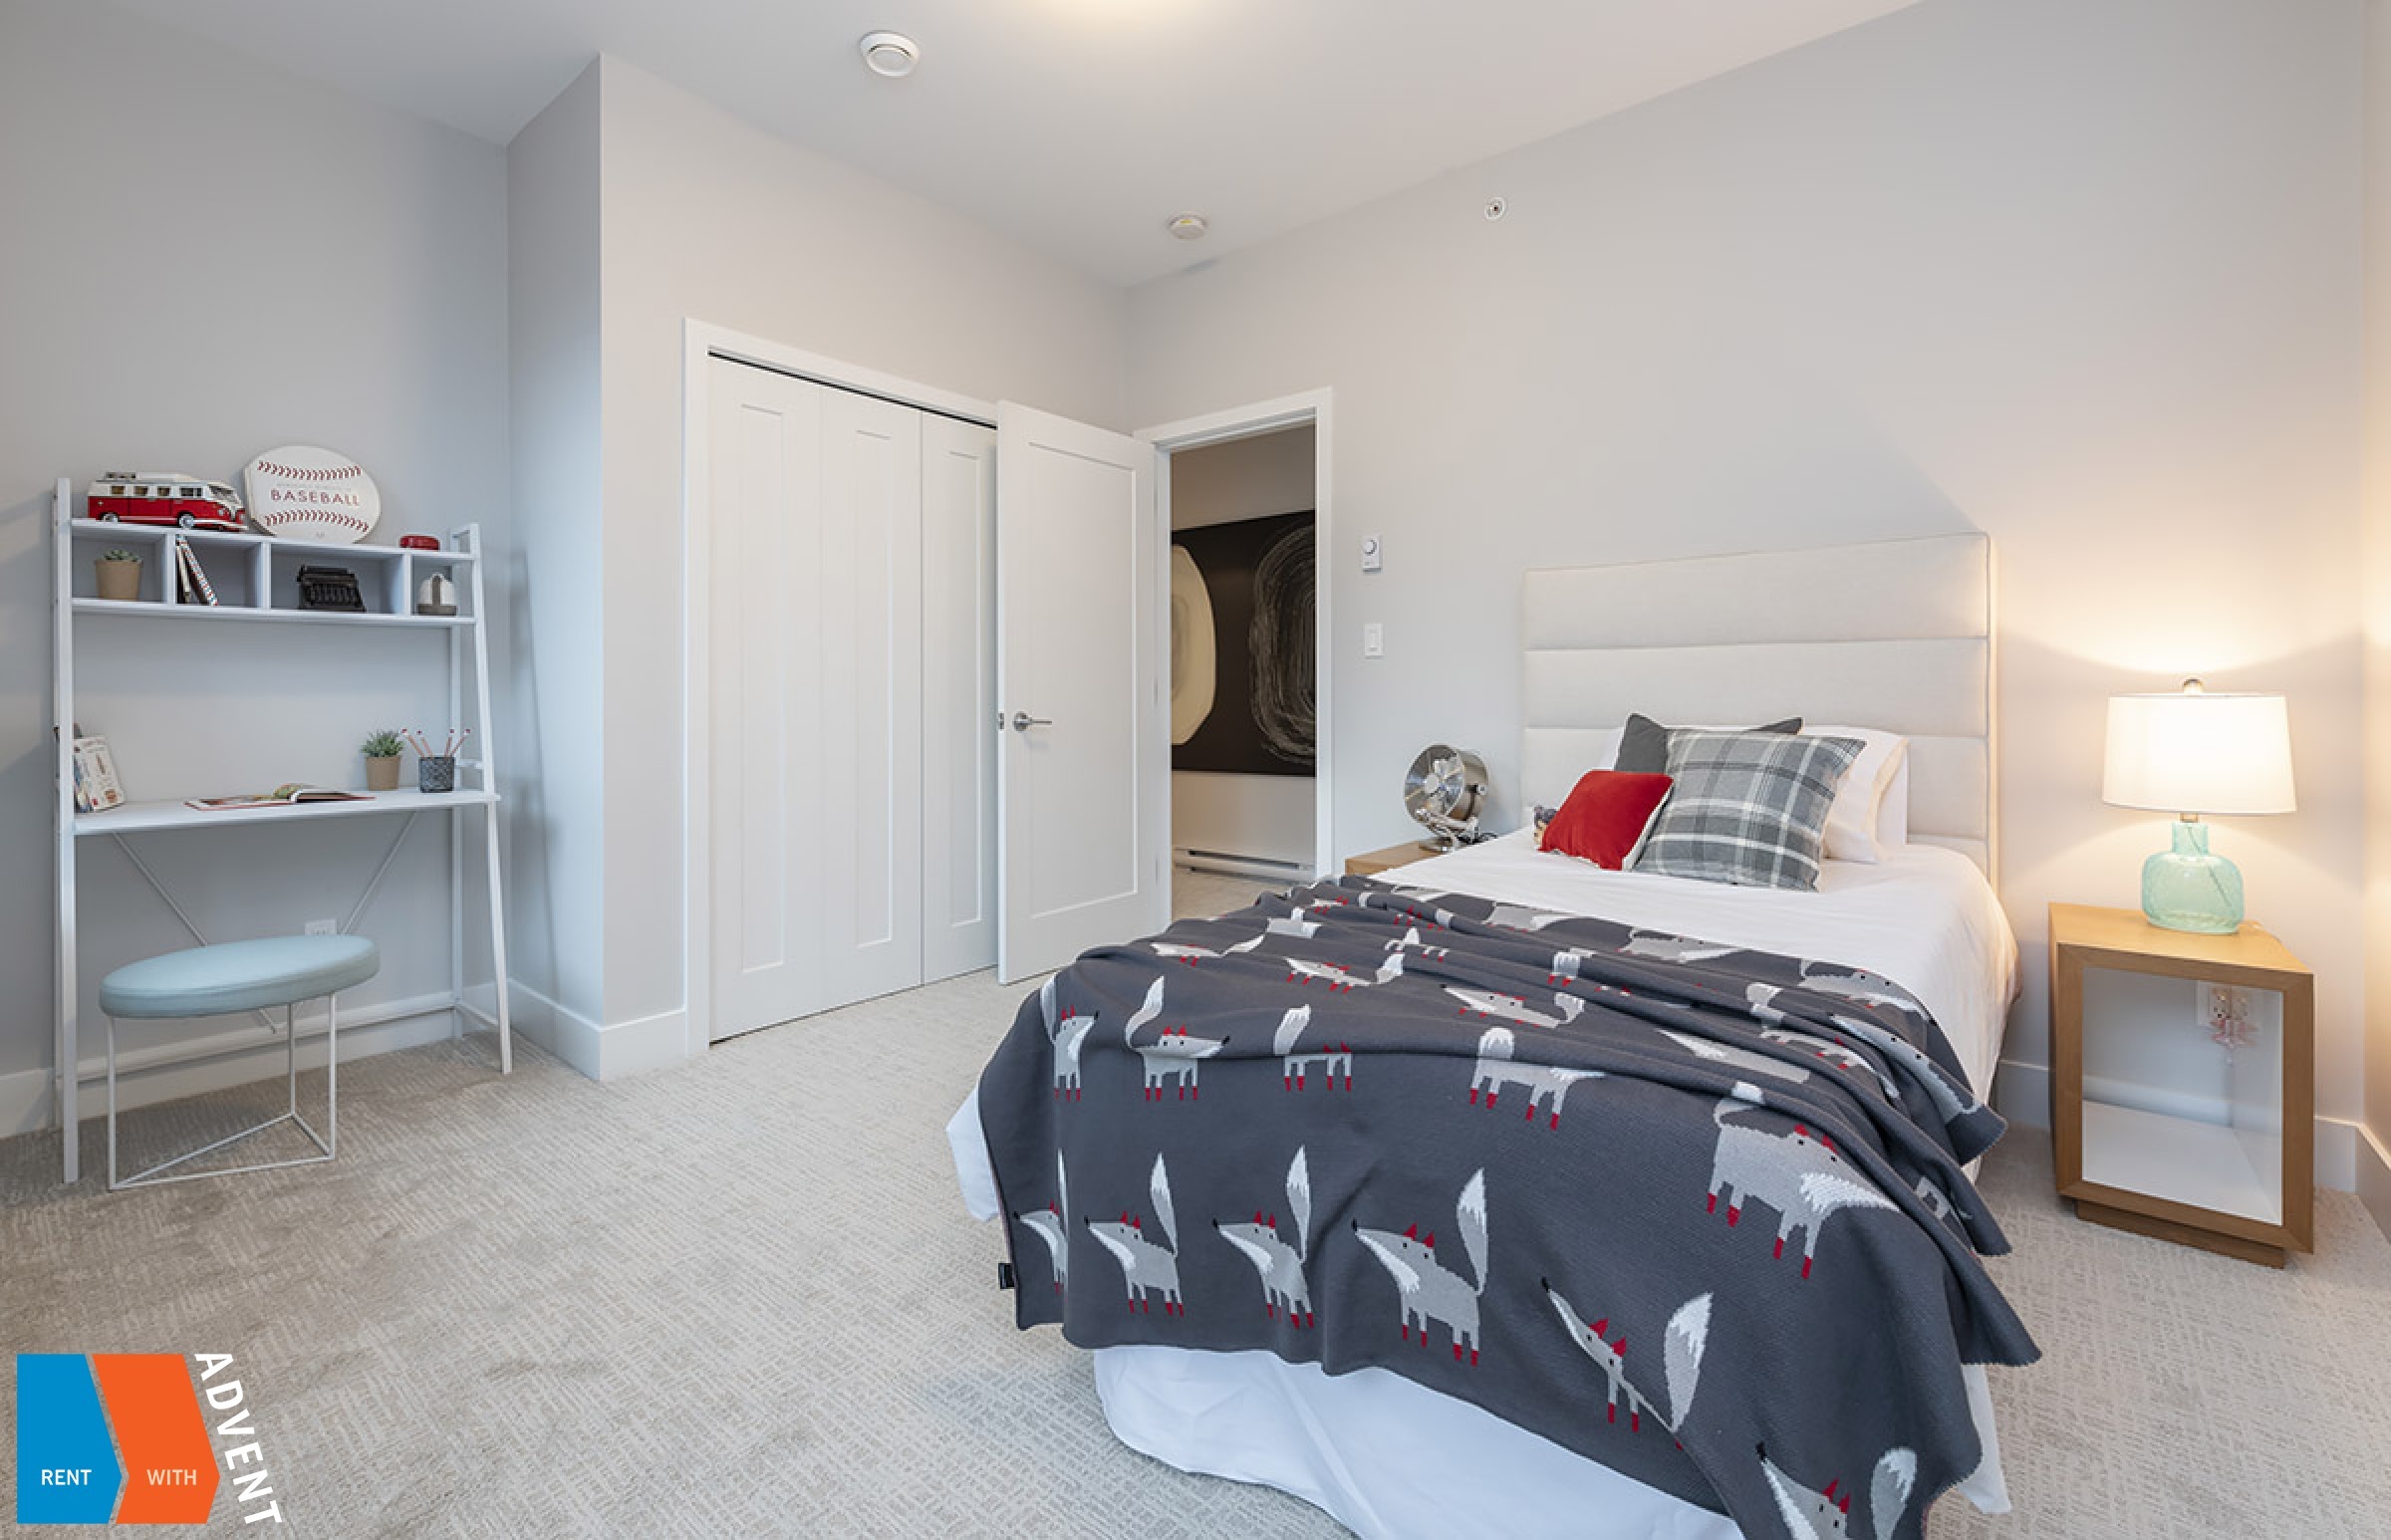 UNIT C: Brand New 3 Level 3 Bedroom 3.5 Bathroom Townhouse Rentals at The Post in Ladner, Delta. The Post (Unit C) 4771 54A Street, Ladner, BC, Canada.